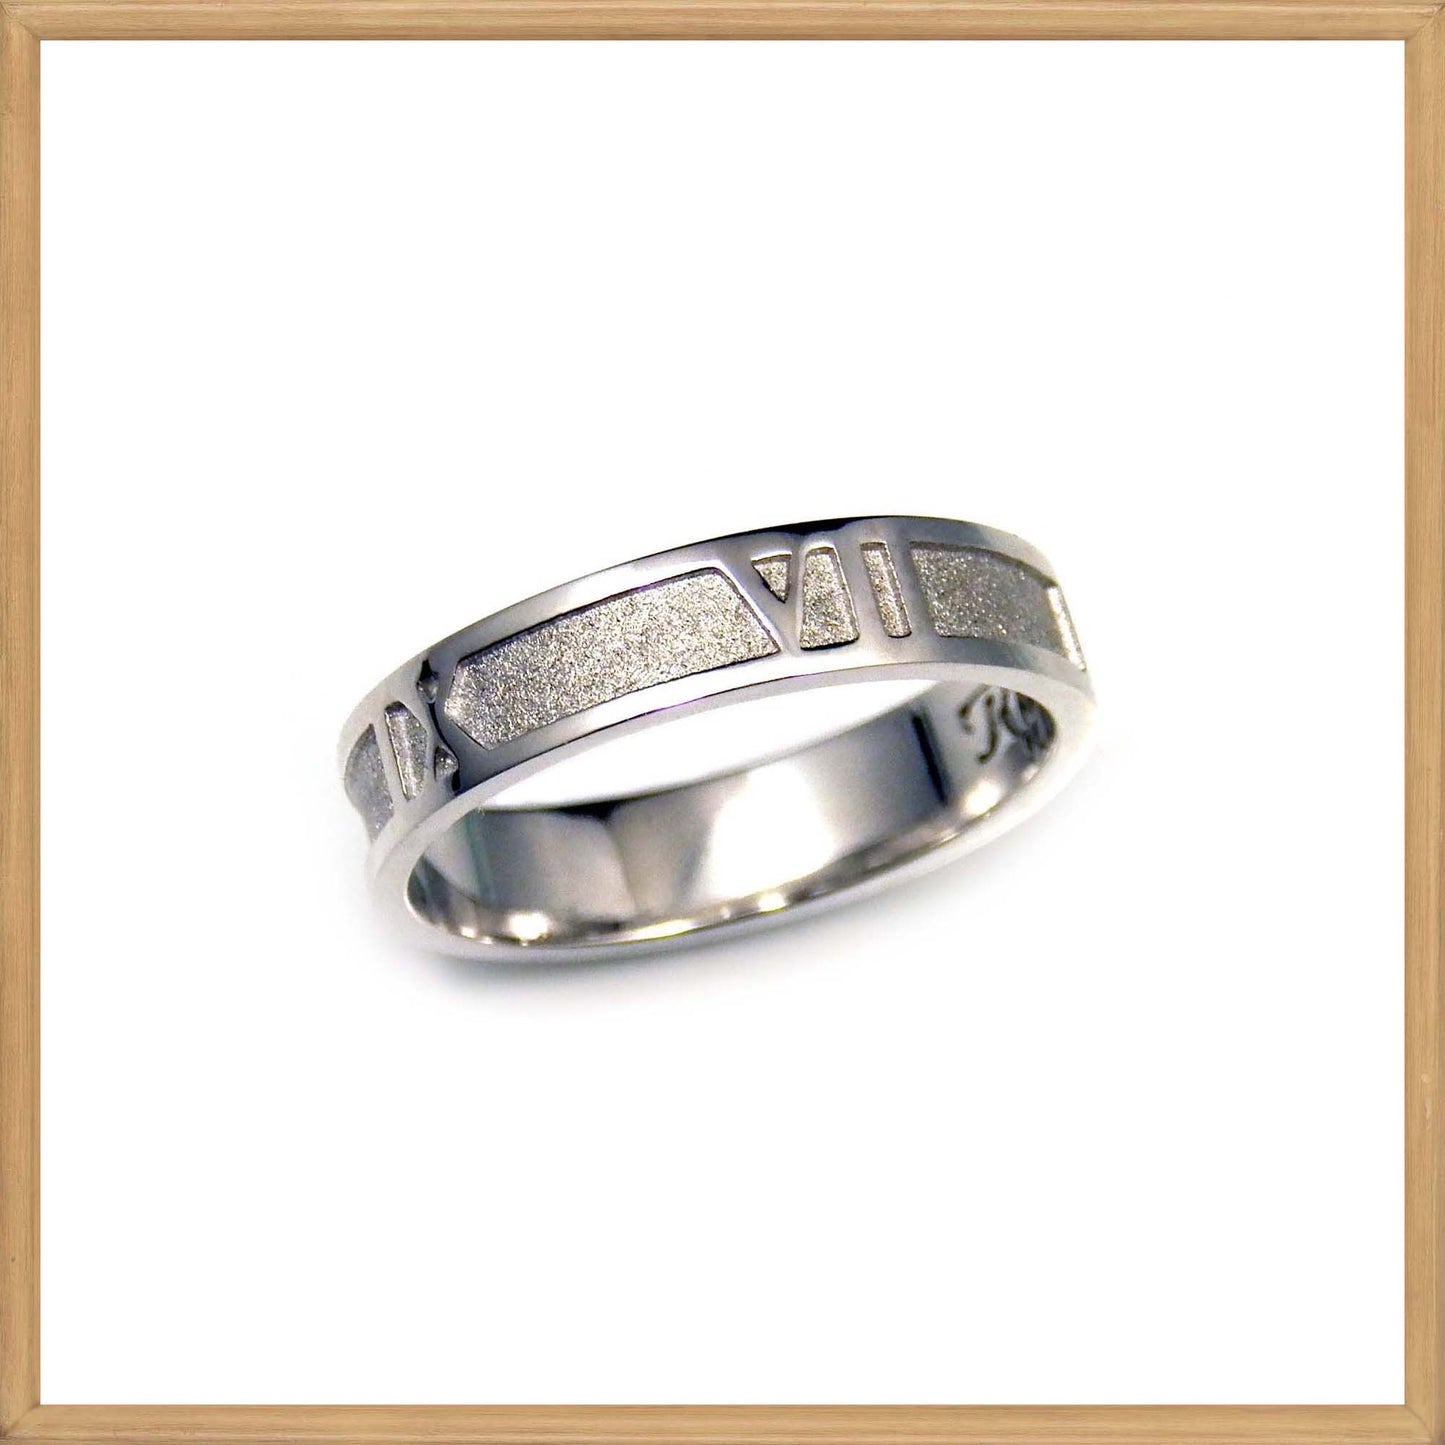 Roman Numerals Ring in sterling silver